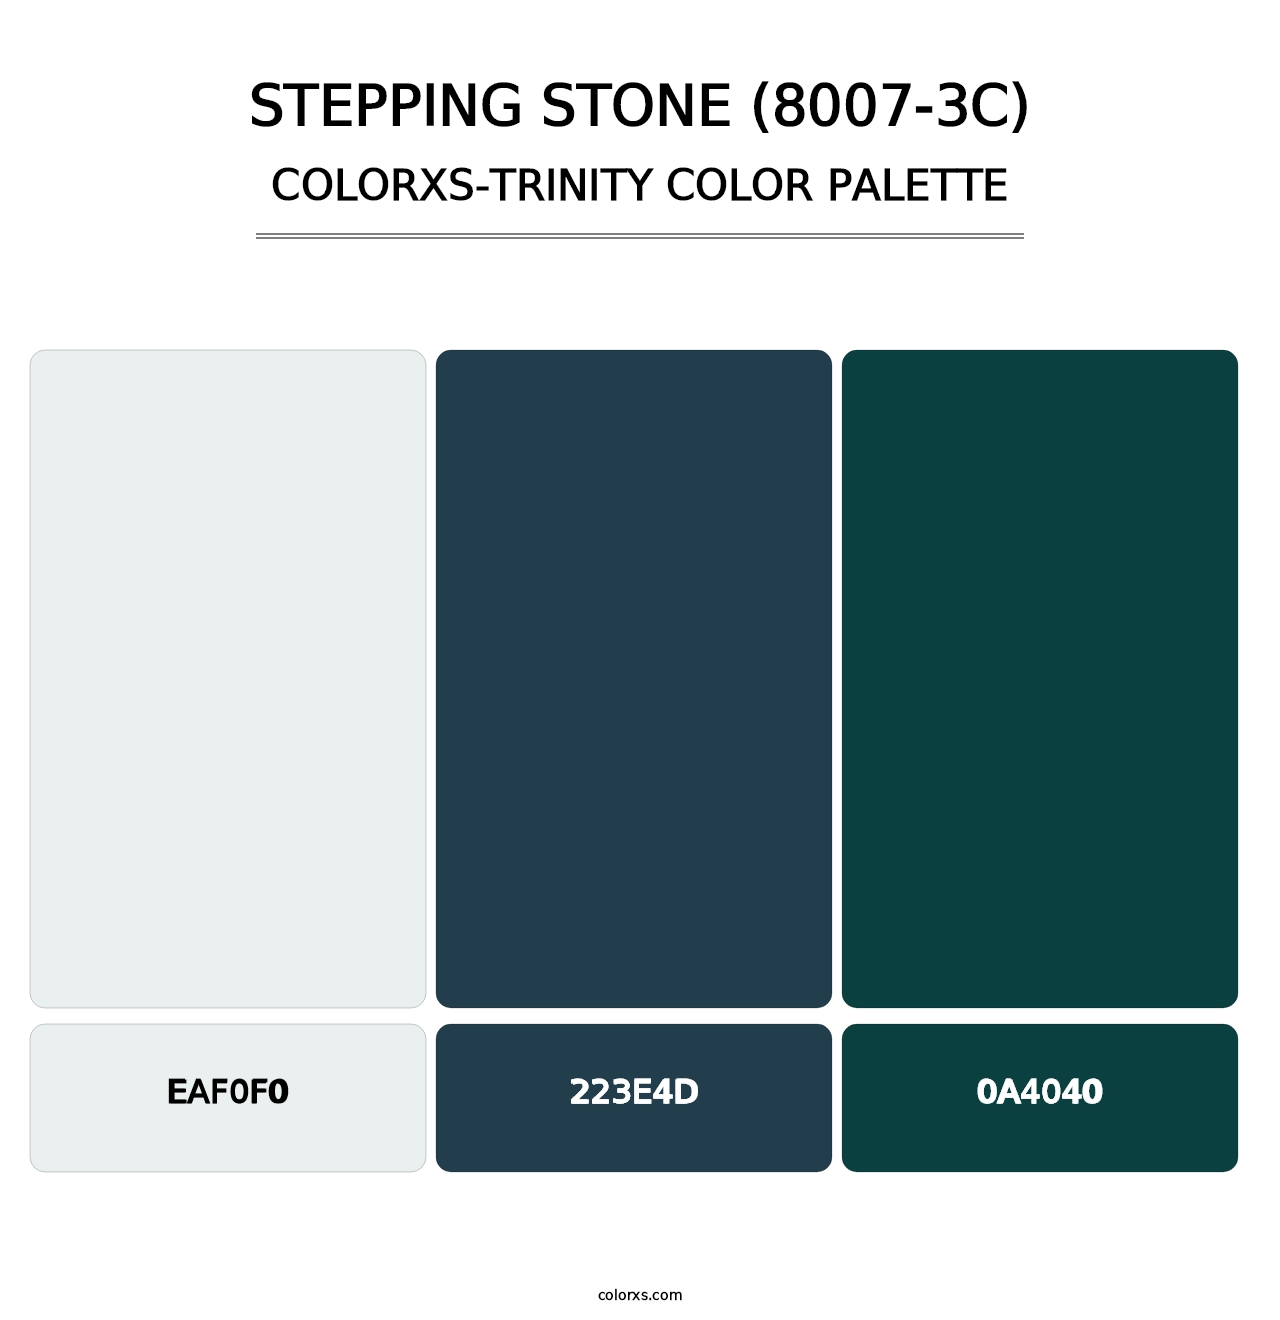 Stepping Stone (8007-3C) - Colorxs Trinity Palette